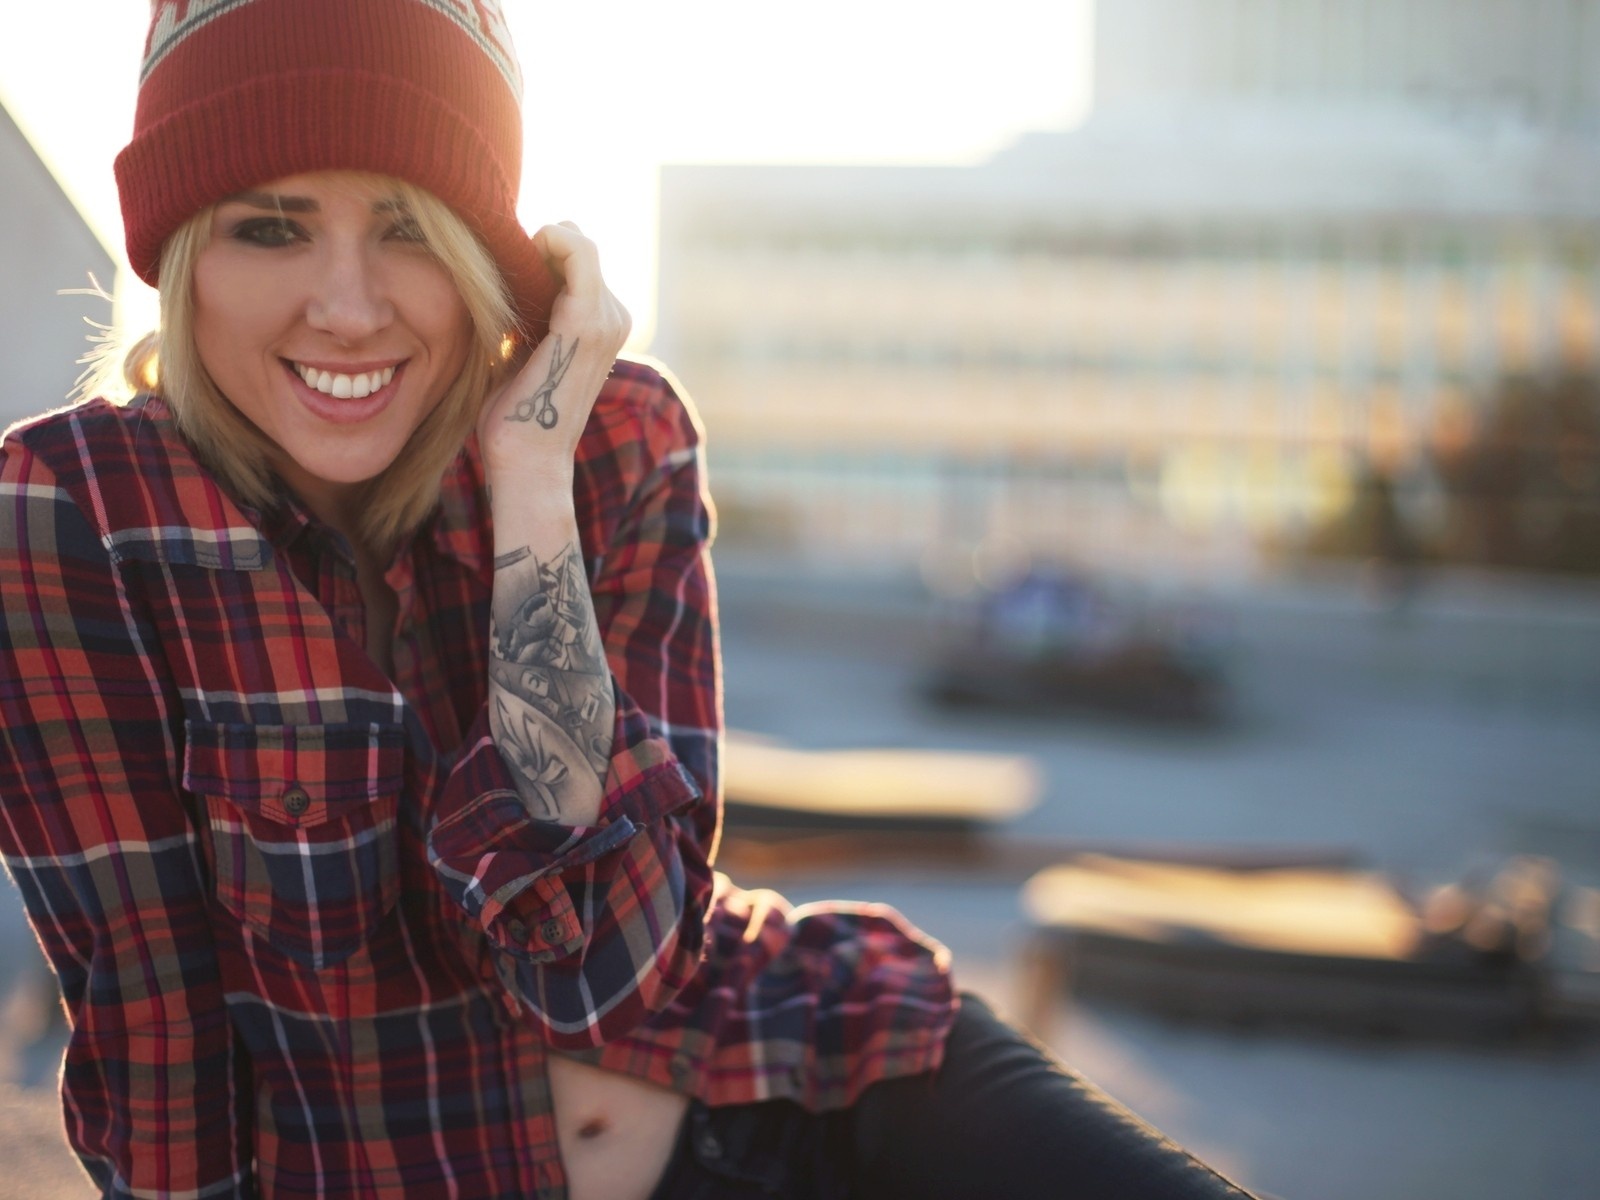 Beautiful TV & Movies Post, Alysha Nett Smiling, Sunlight on Her, Both Are Bright and Warm 1600X1200 free wallpaper download